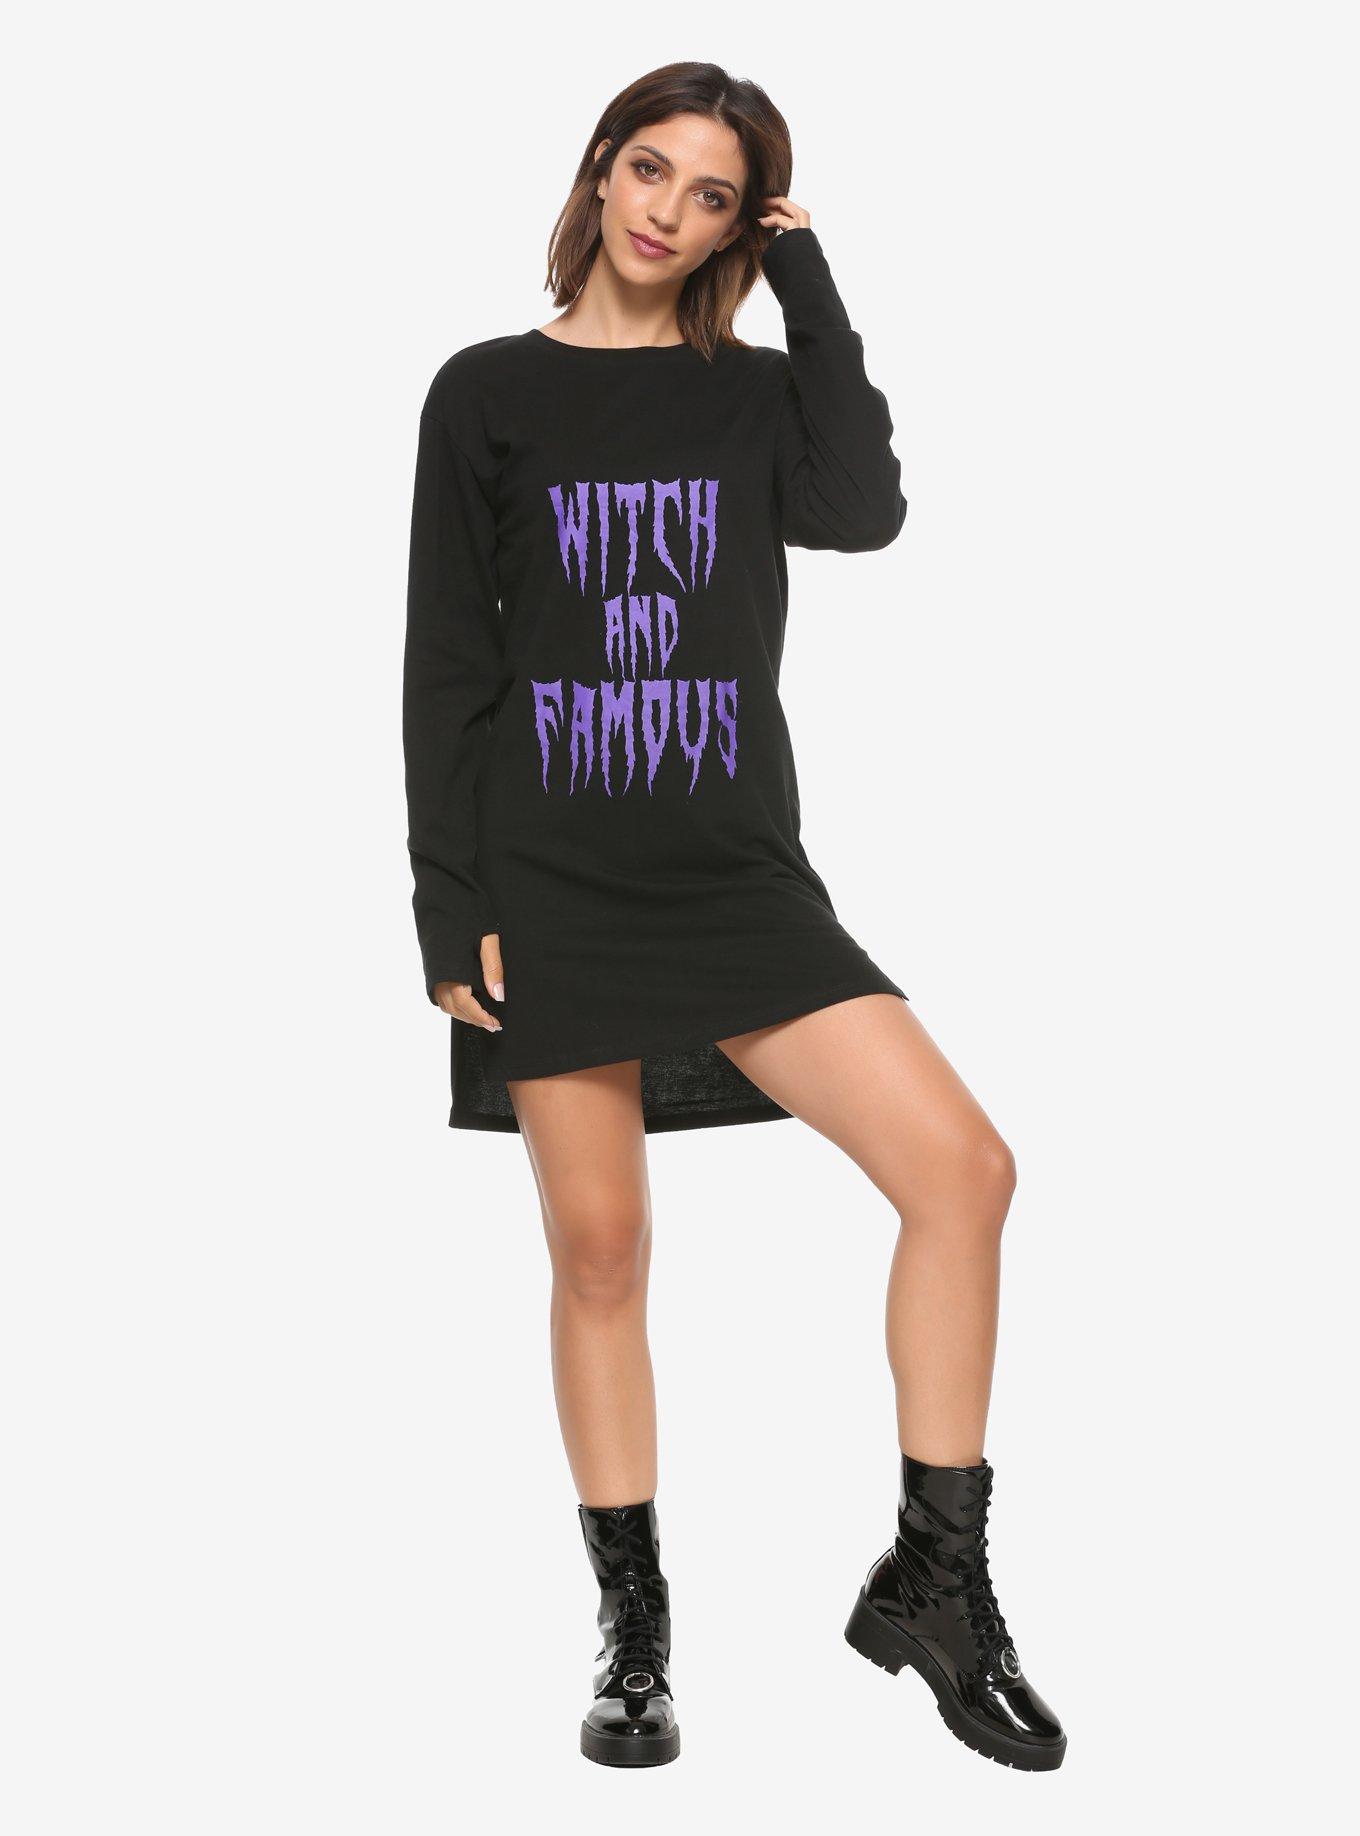 Witch And Famous Long-Sleeve T-Shirt Dress, PURPLE, alternate